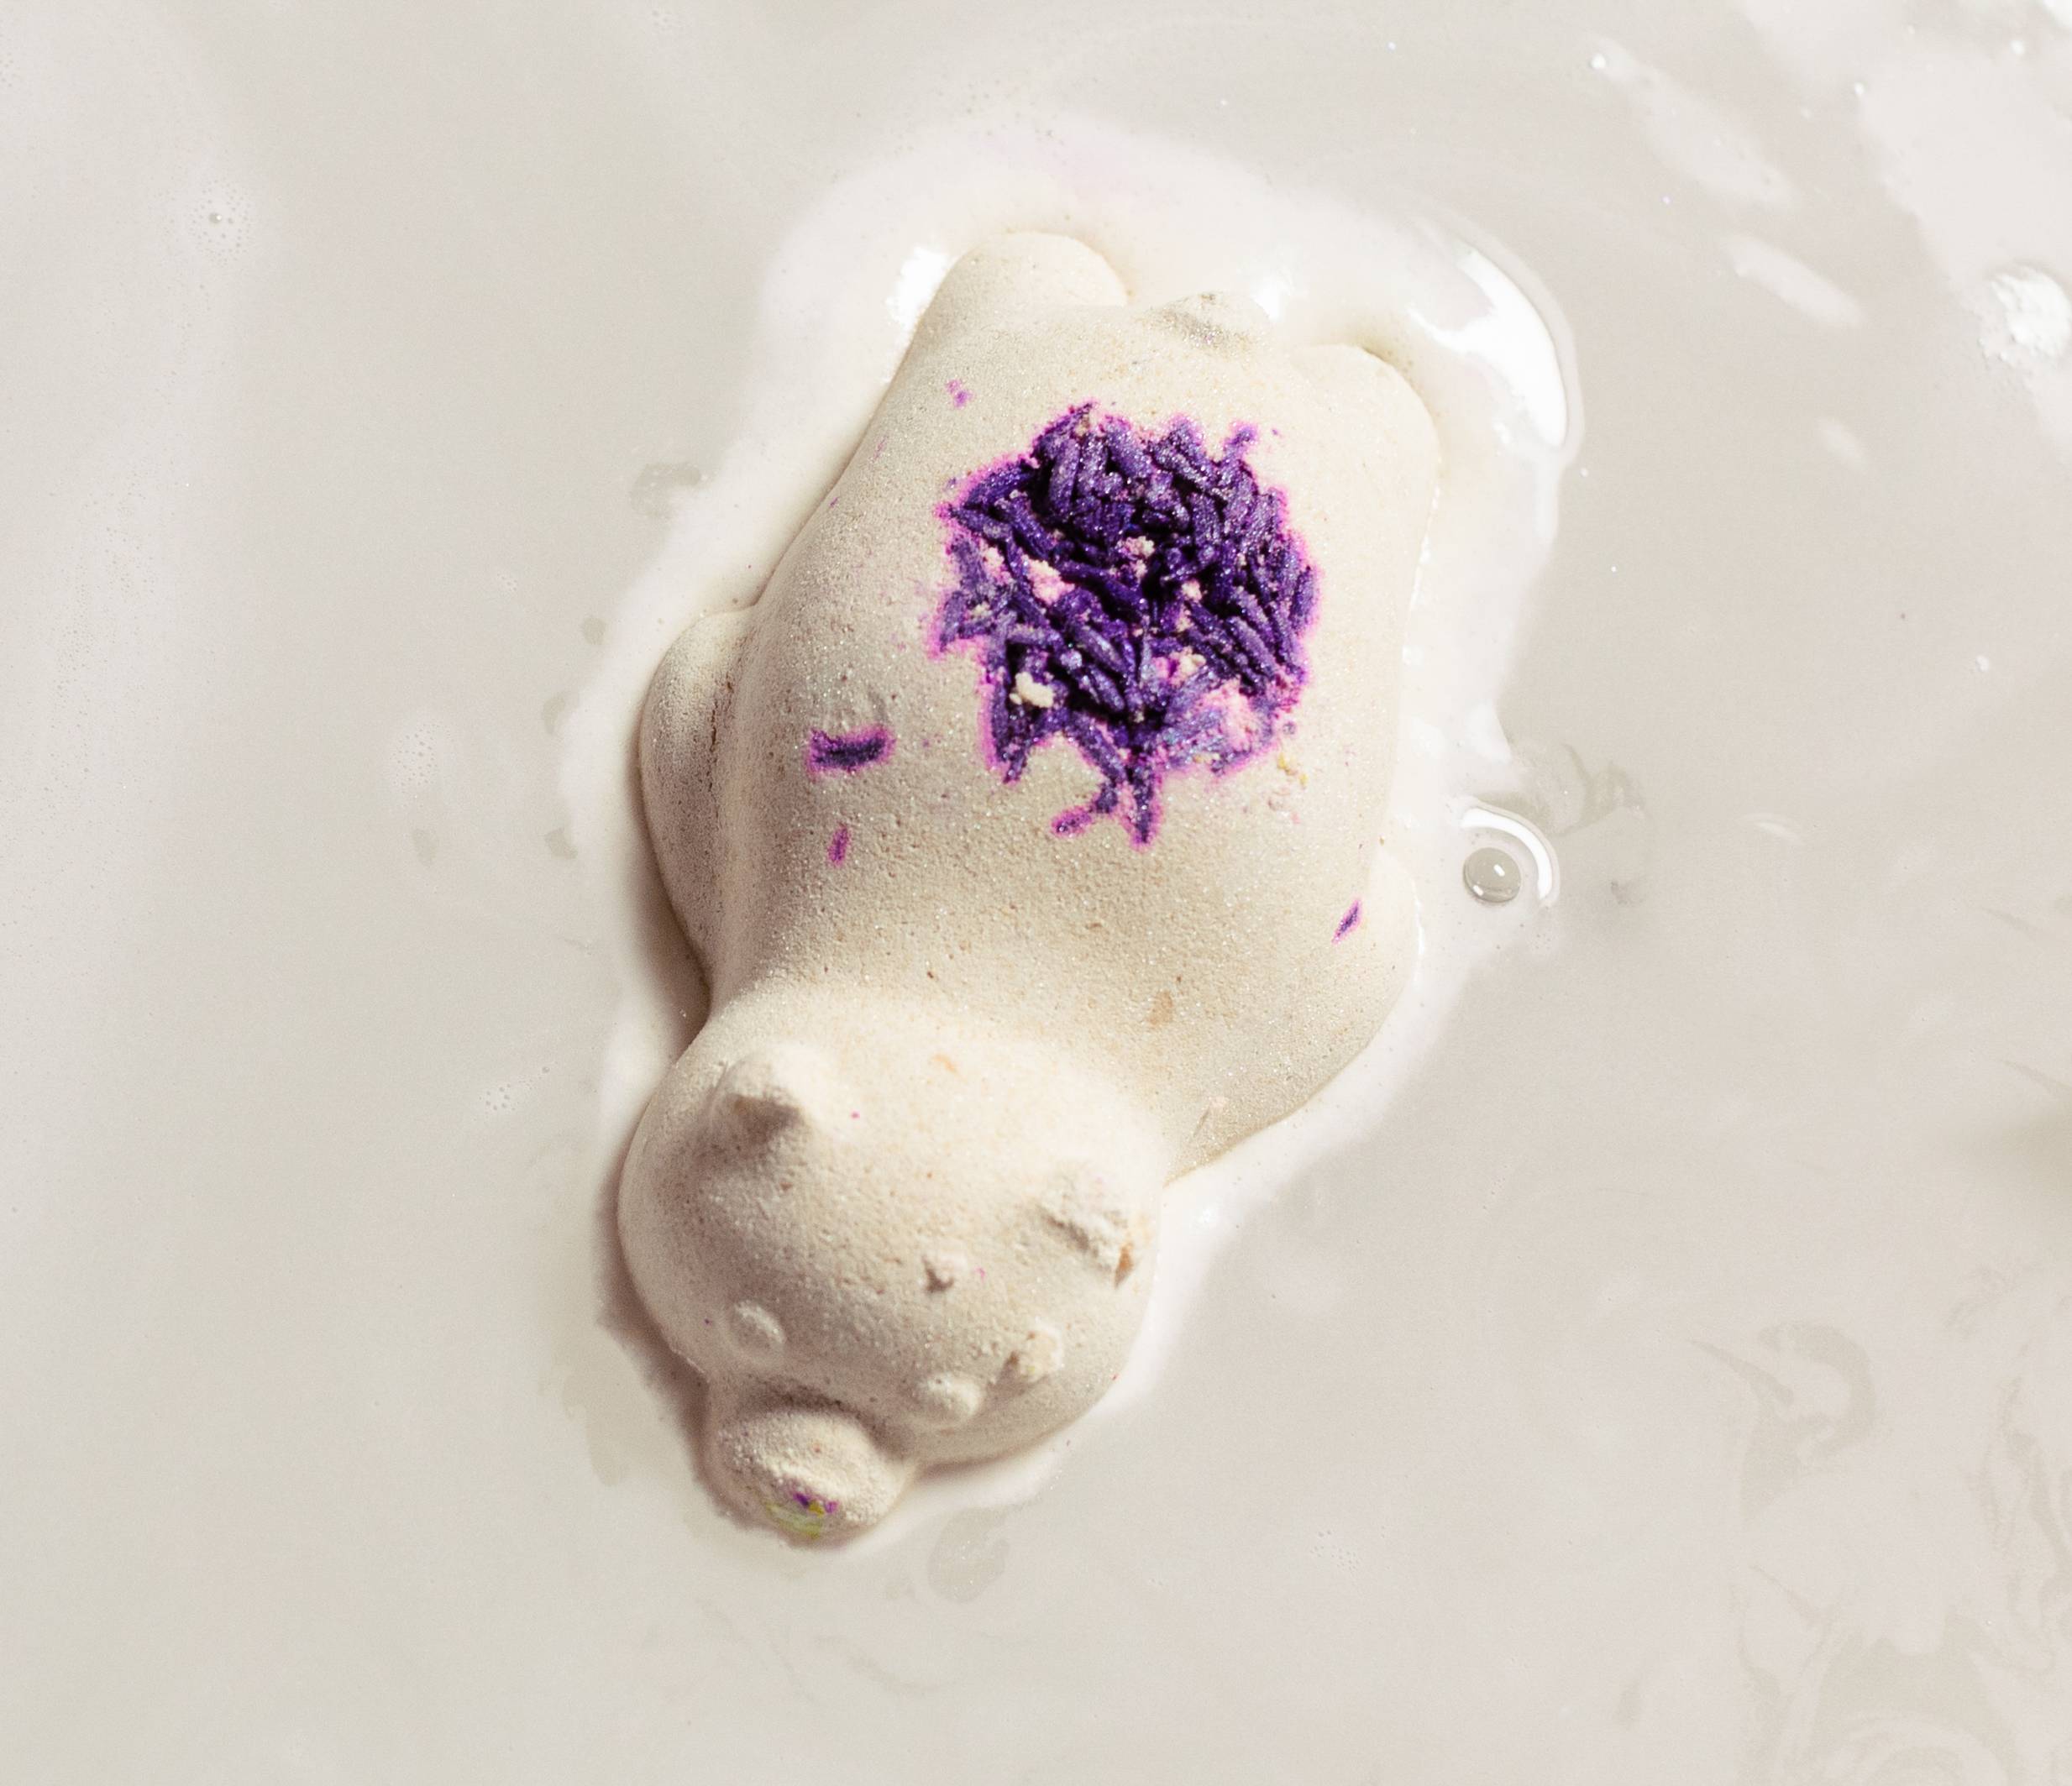 Image shows the Sleepy Bear bath bomb laying on top of water with luscious, creamy foam dispersing all around.